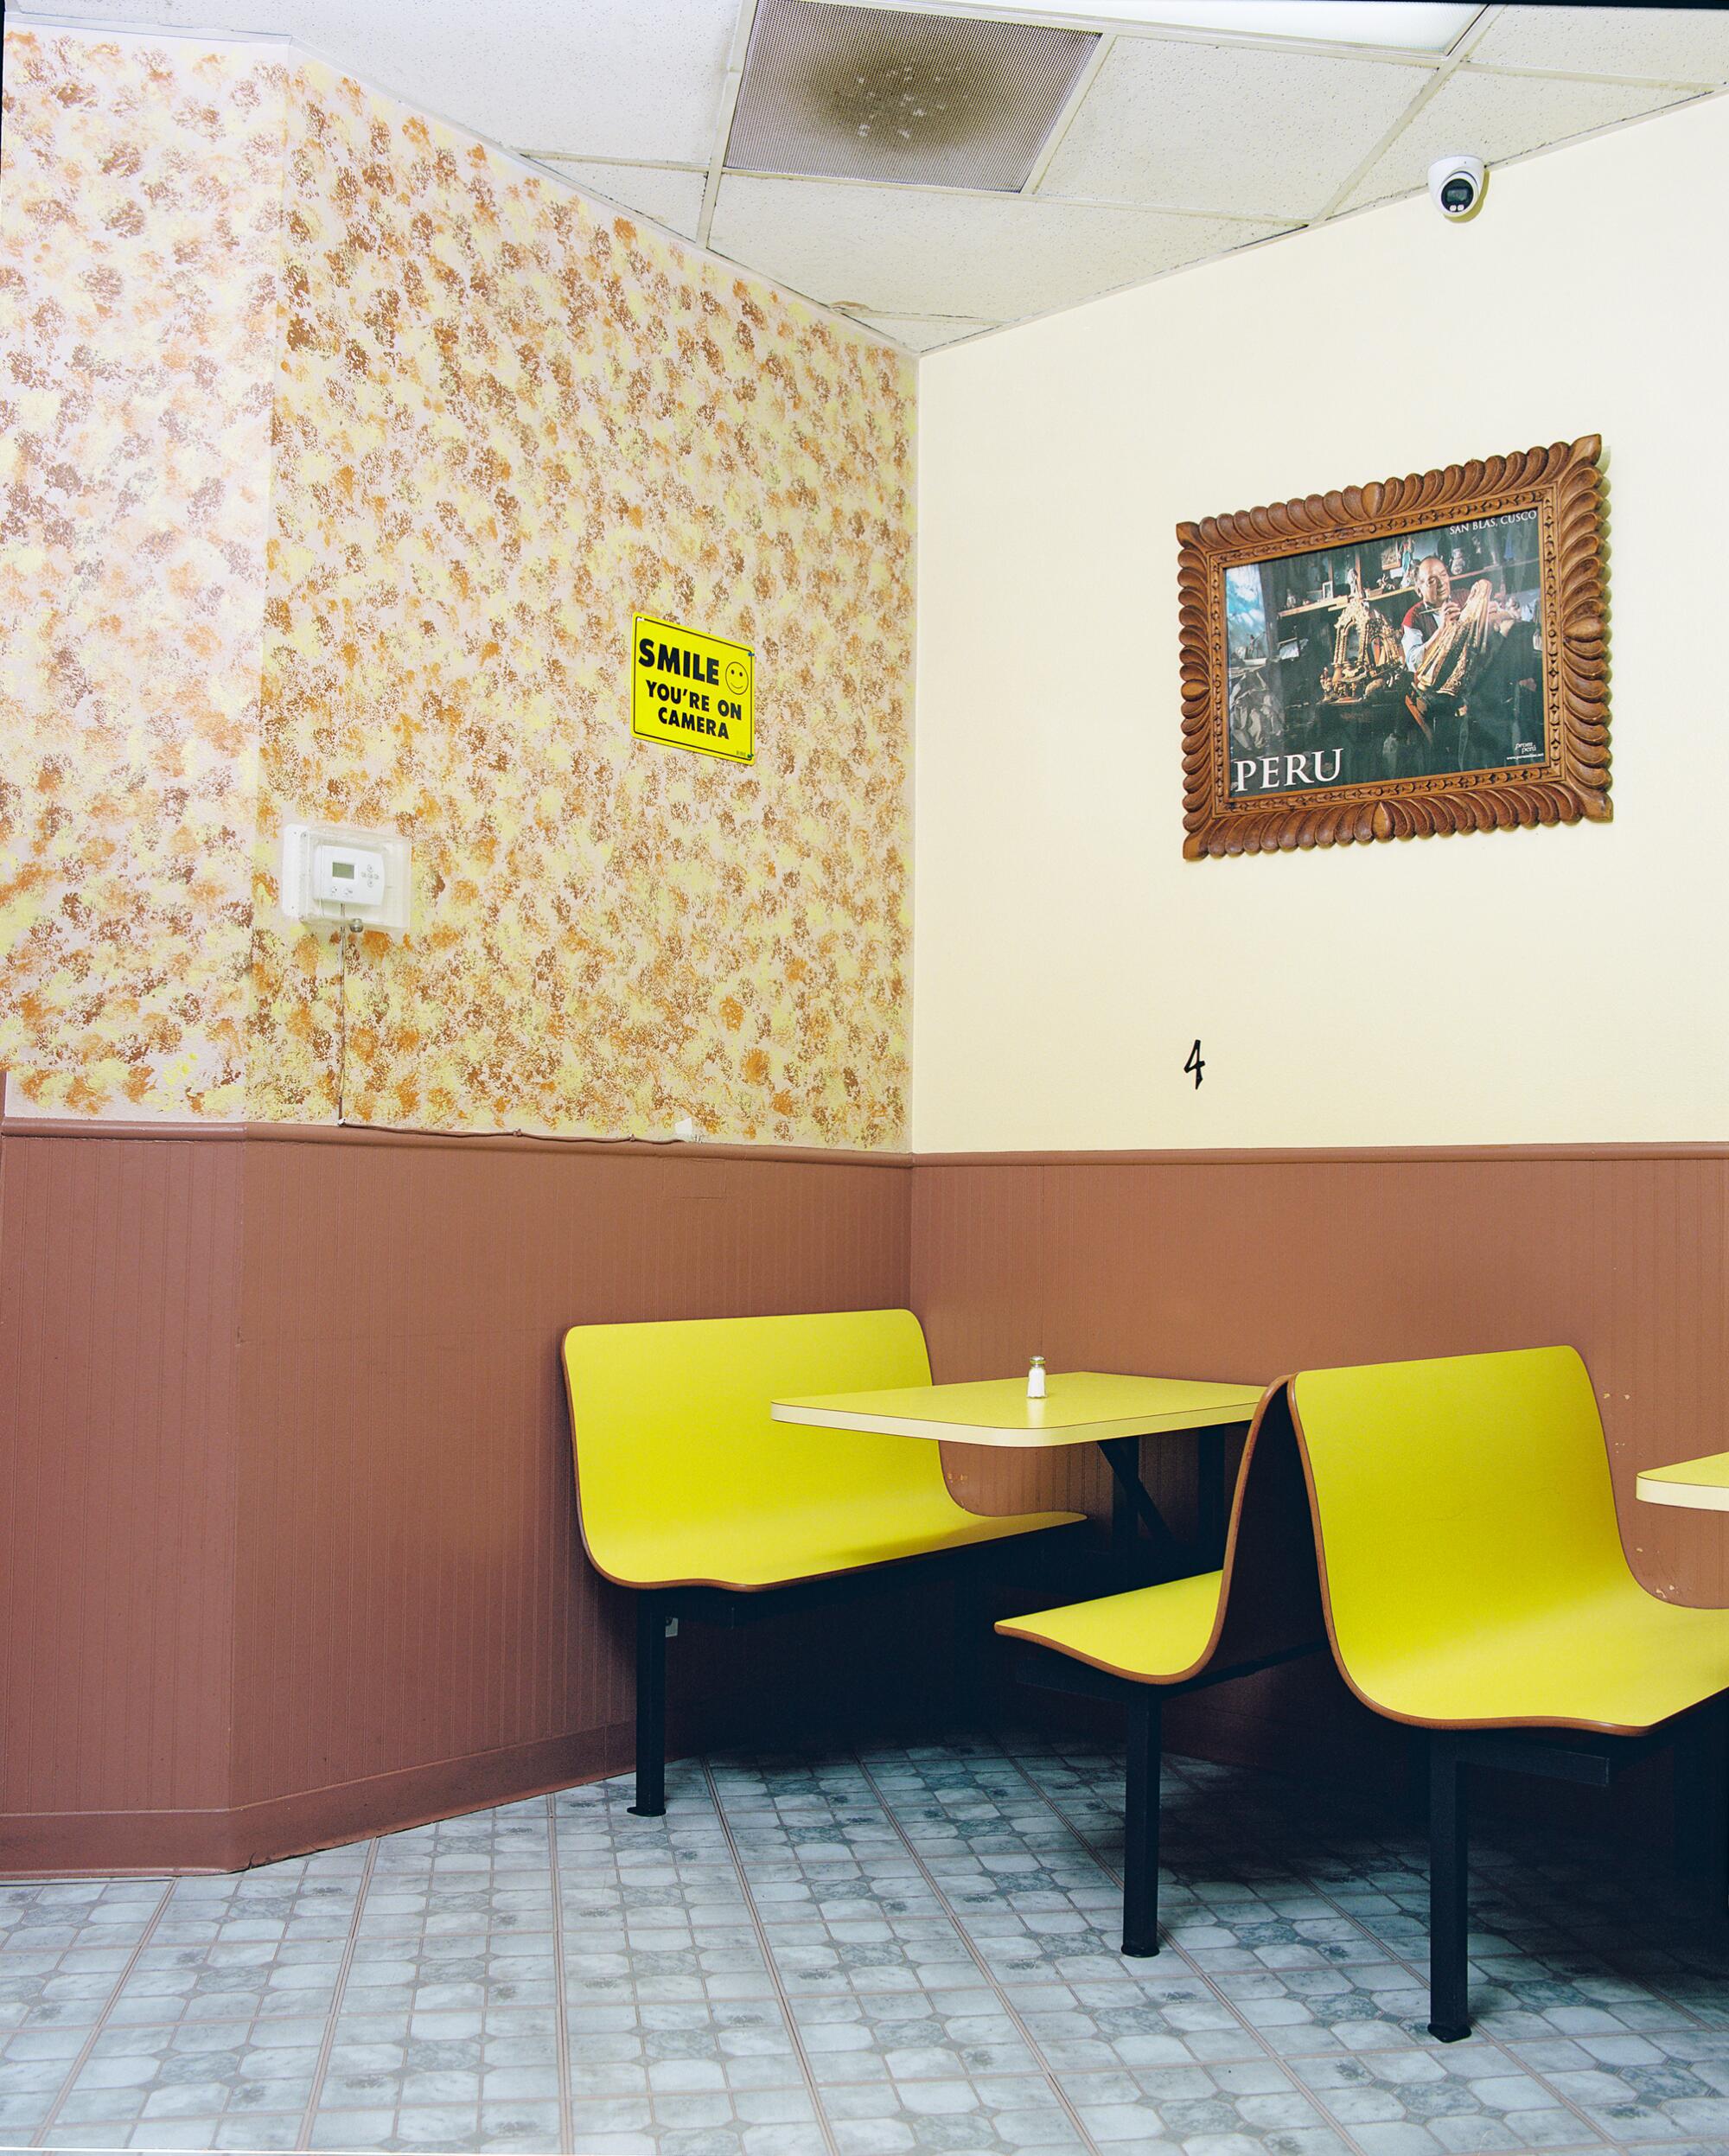 A photo of yellow booths and yellow tables at a Peruvian restaurant.